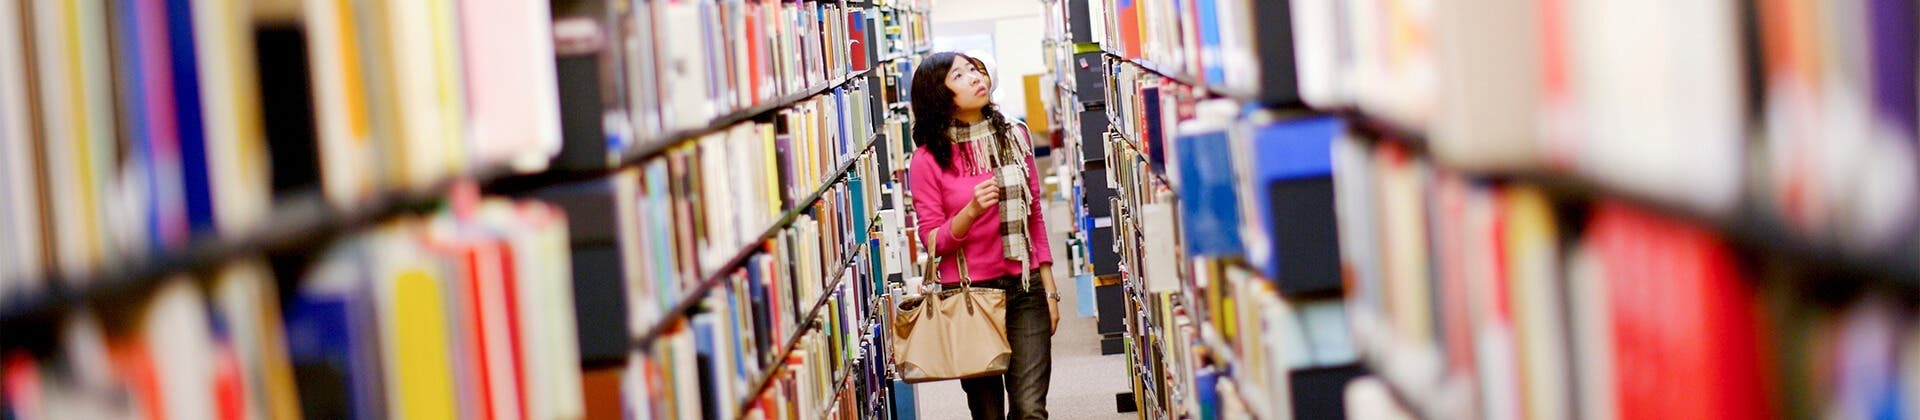 Surrey student in library